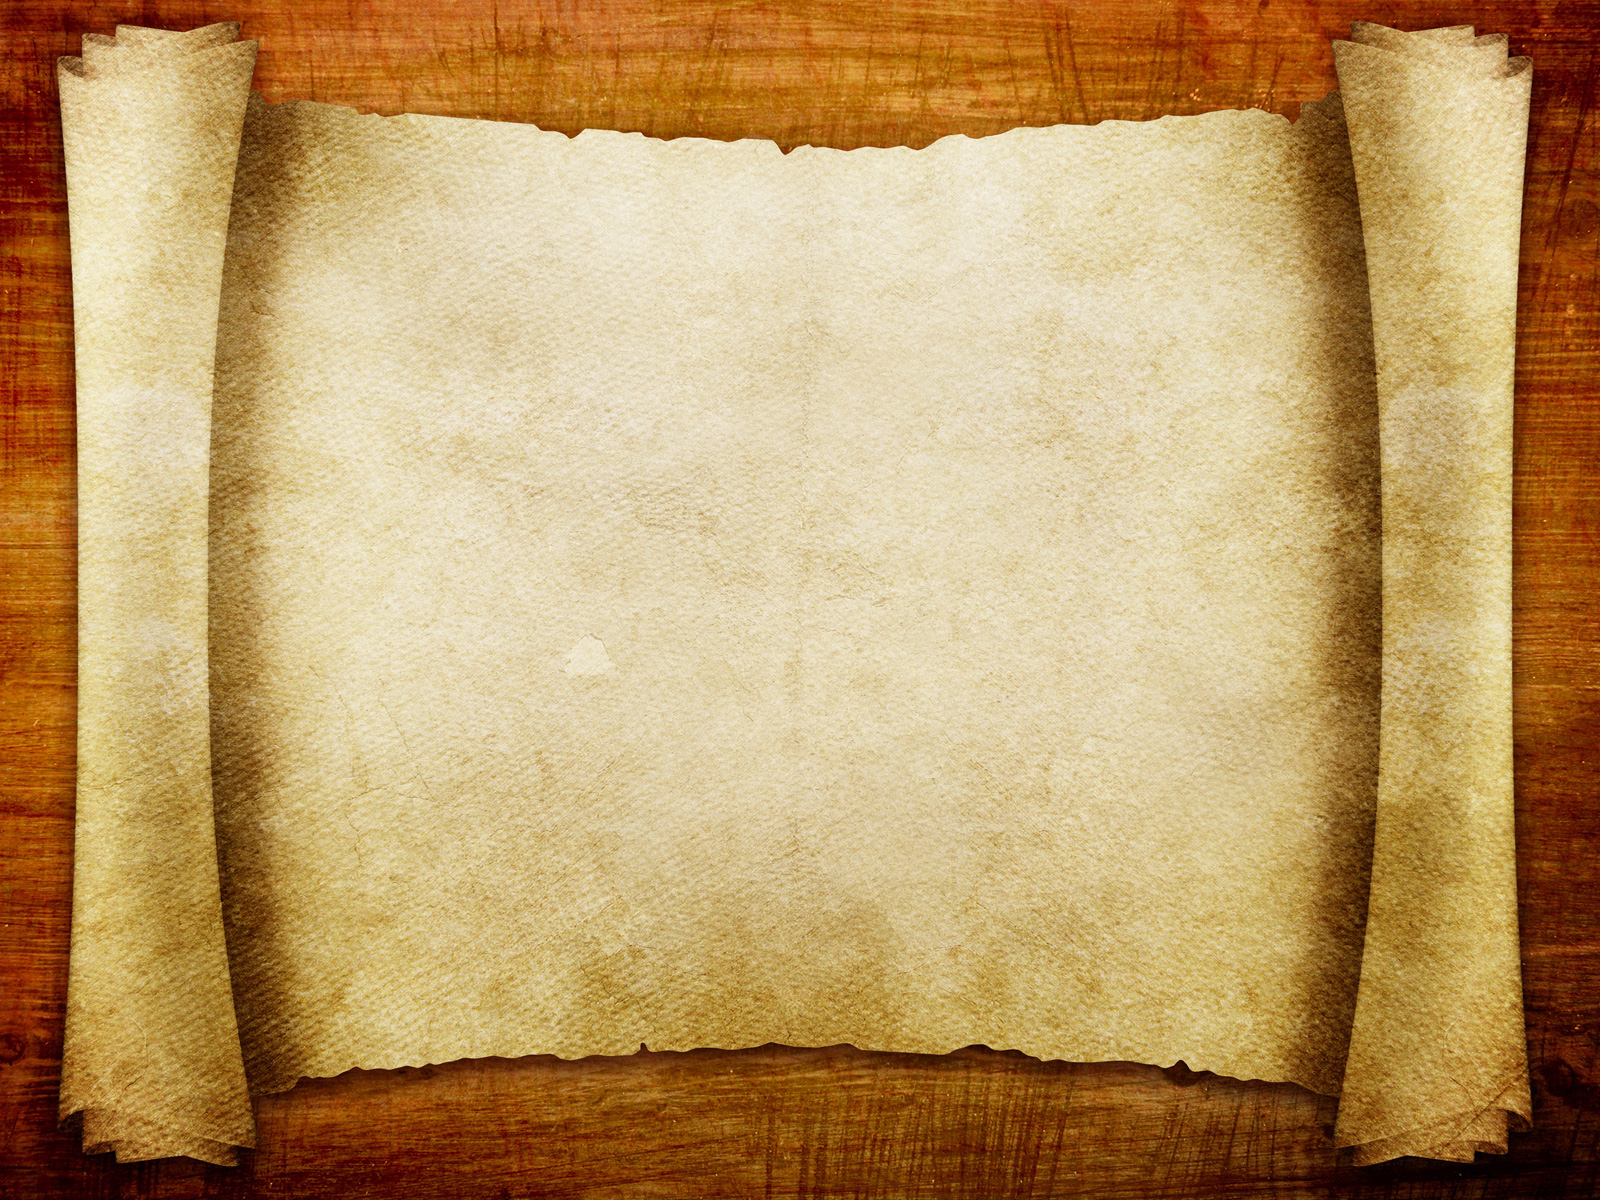 Advanced Blank Scroll Paper free powerpoint background